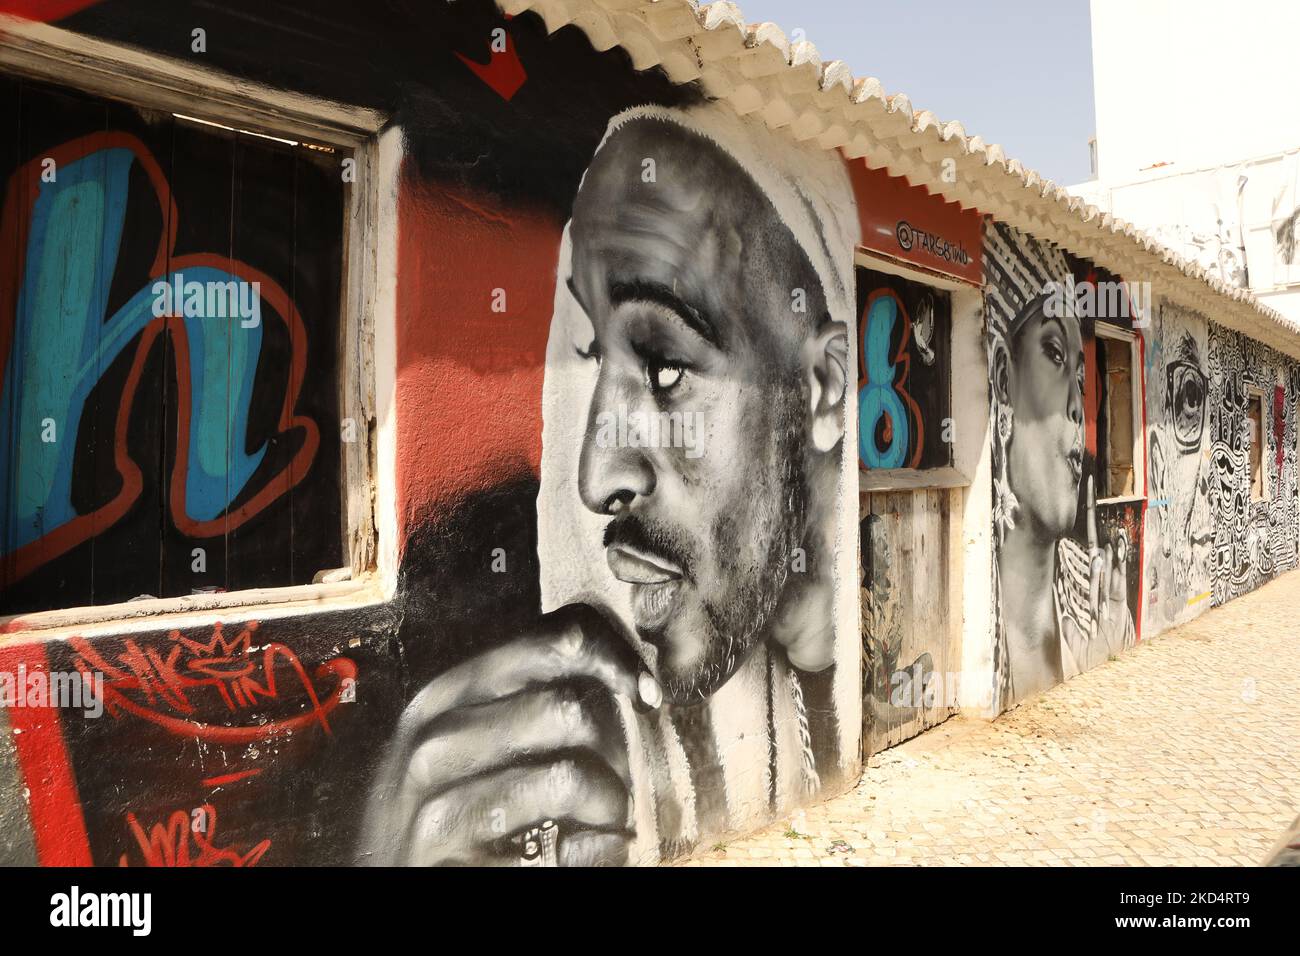 Street Art. A mural of an African man in old town Lagos, Algarve, Portugal Stock Photo